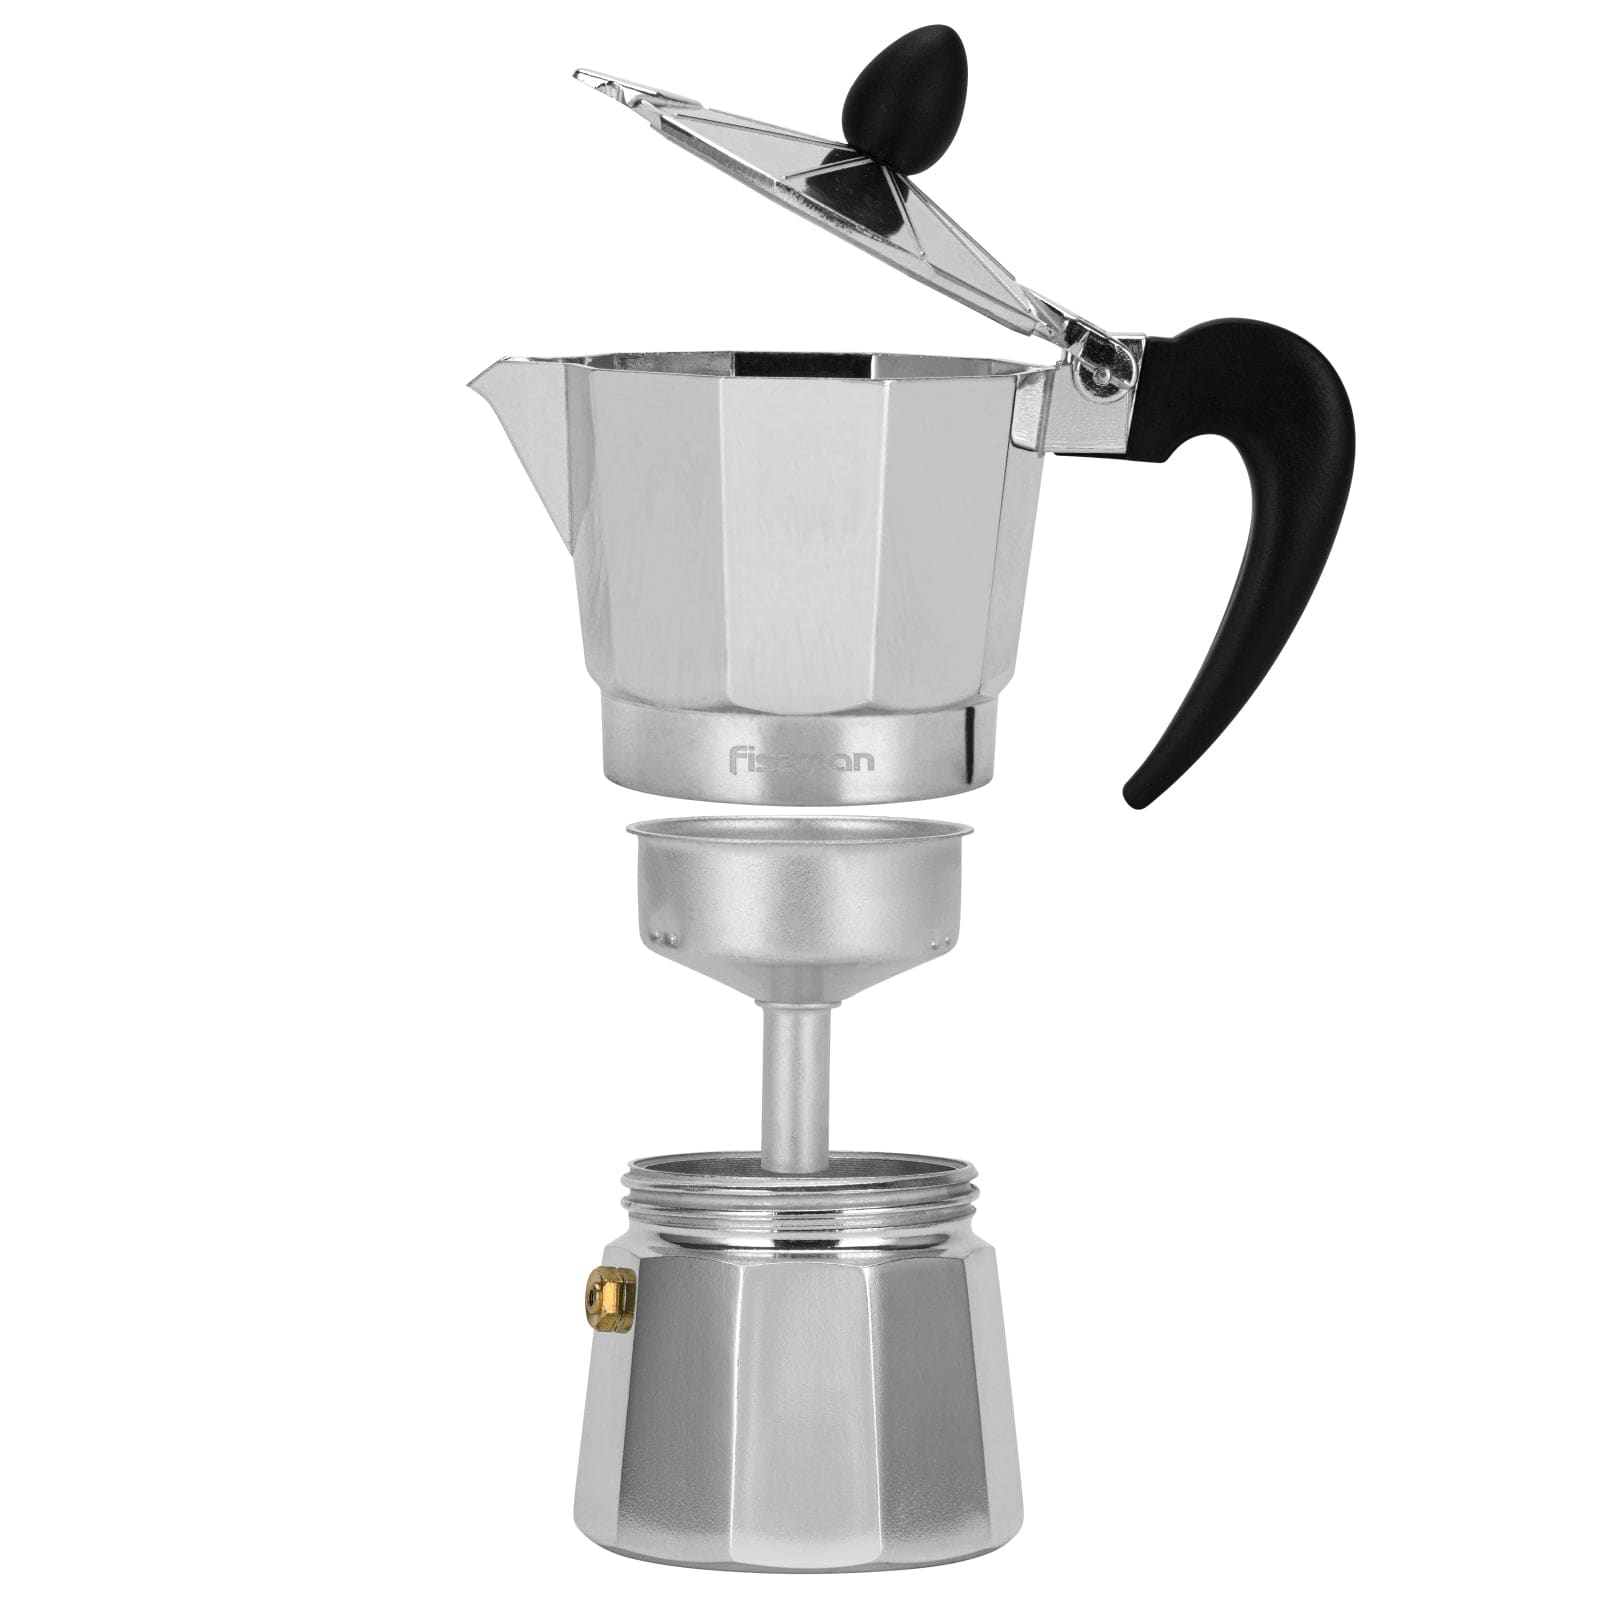 Fissman Set Of Coffee Maker Aluminium For 2 Cups/120ml And 2 Ceramic Cups With 2 Saucers Set